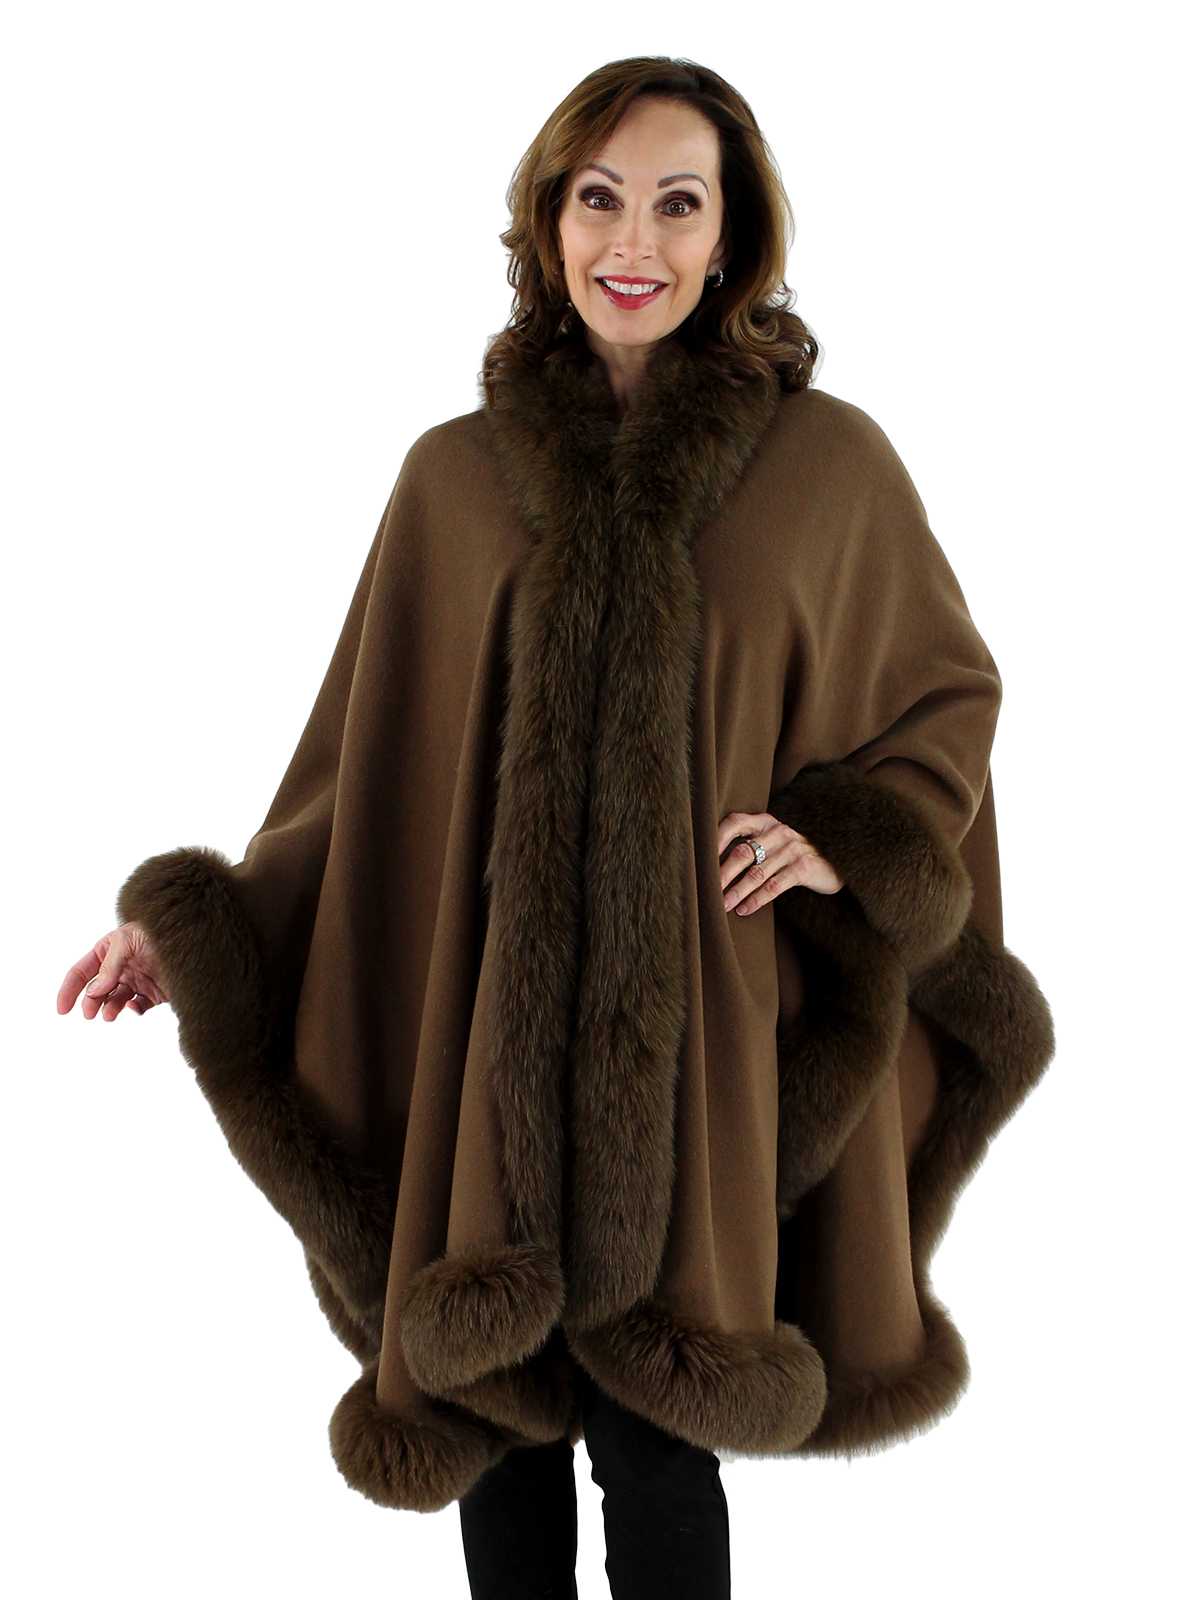 Brown Wool Cape with Fox Fur Trim - Women's Wool Cape - One Size Fits ...